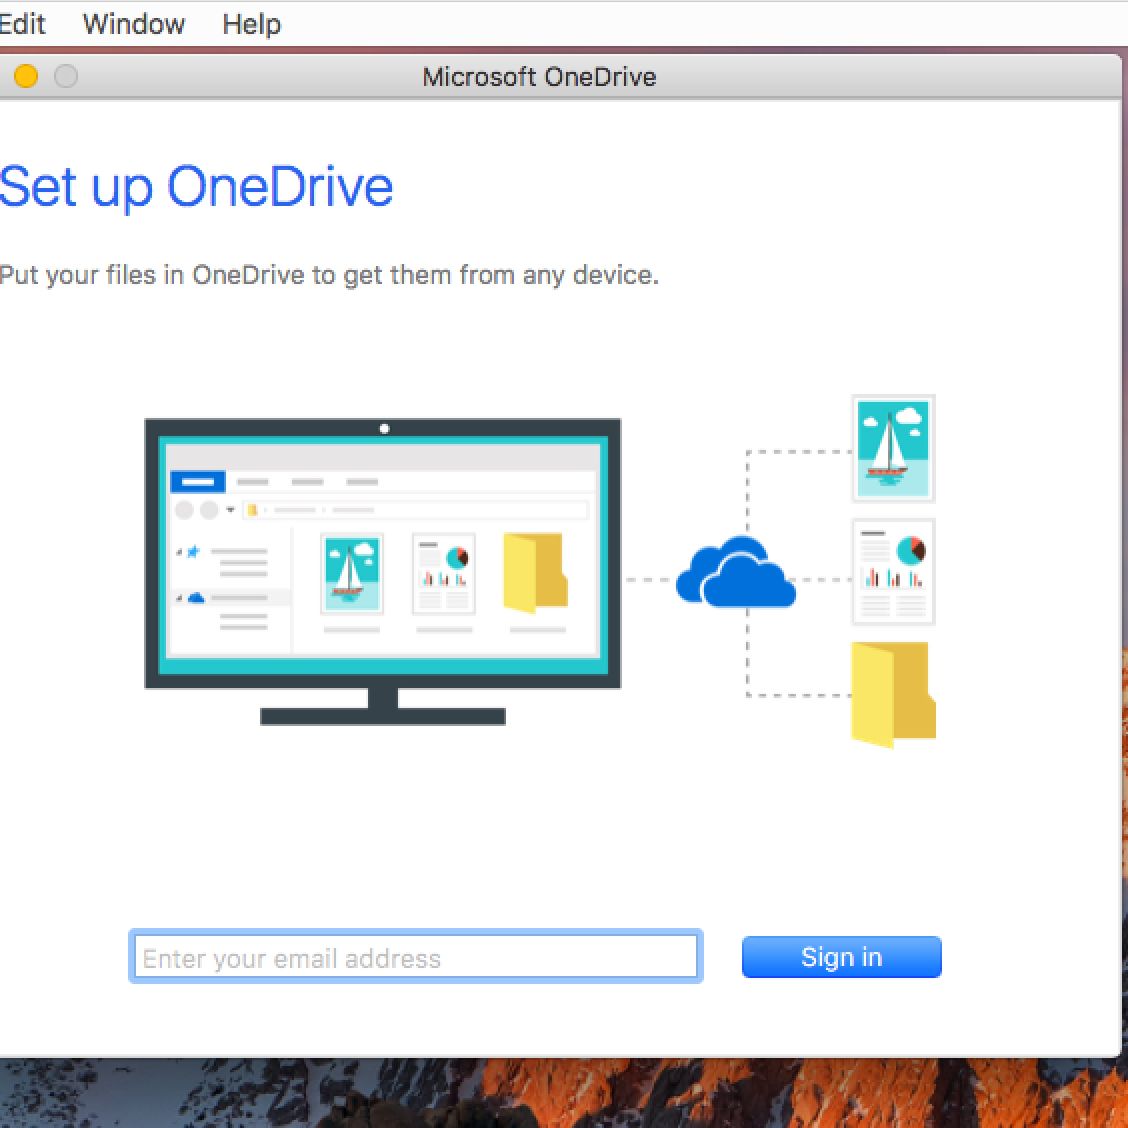 reset onedrive for business mac